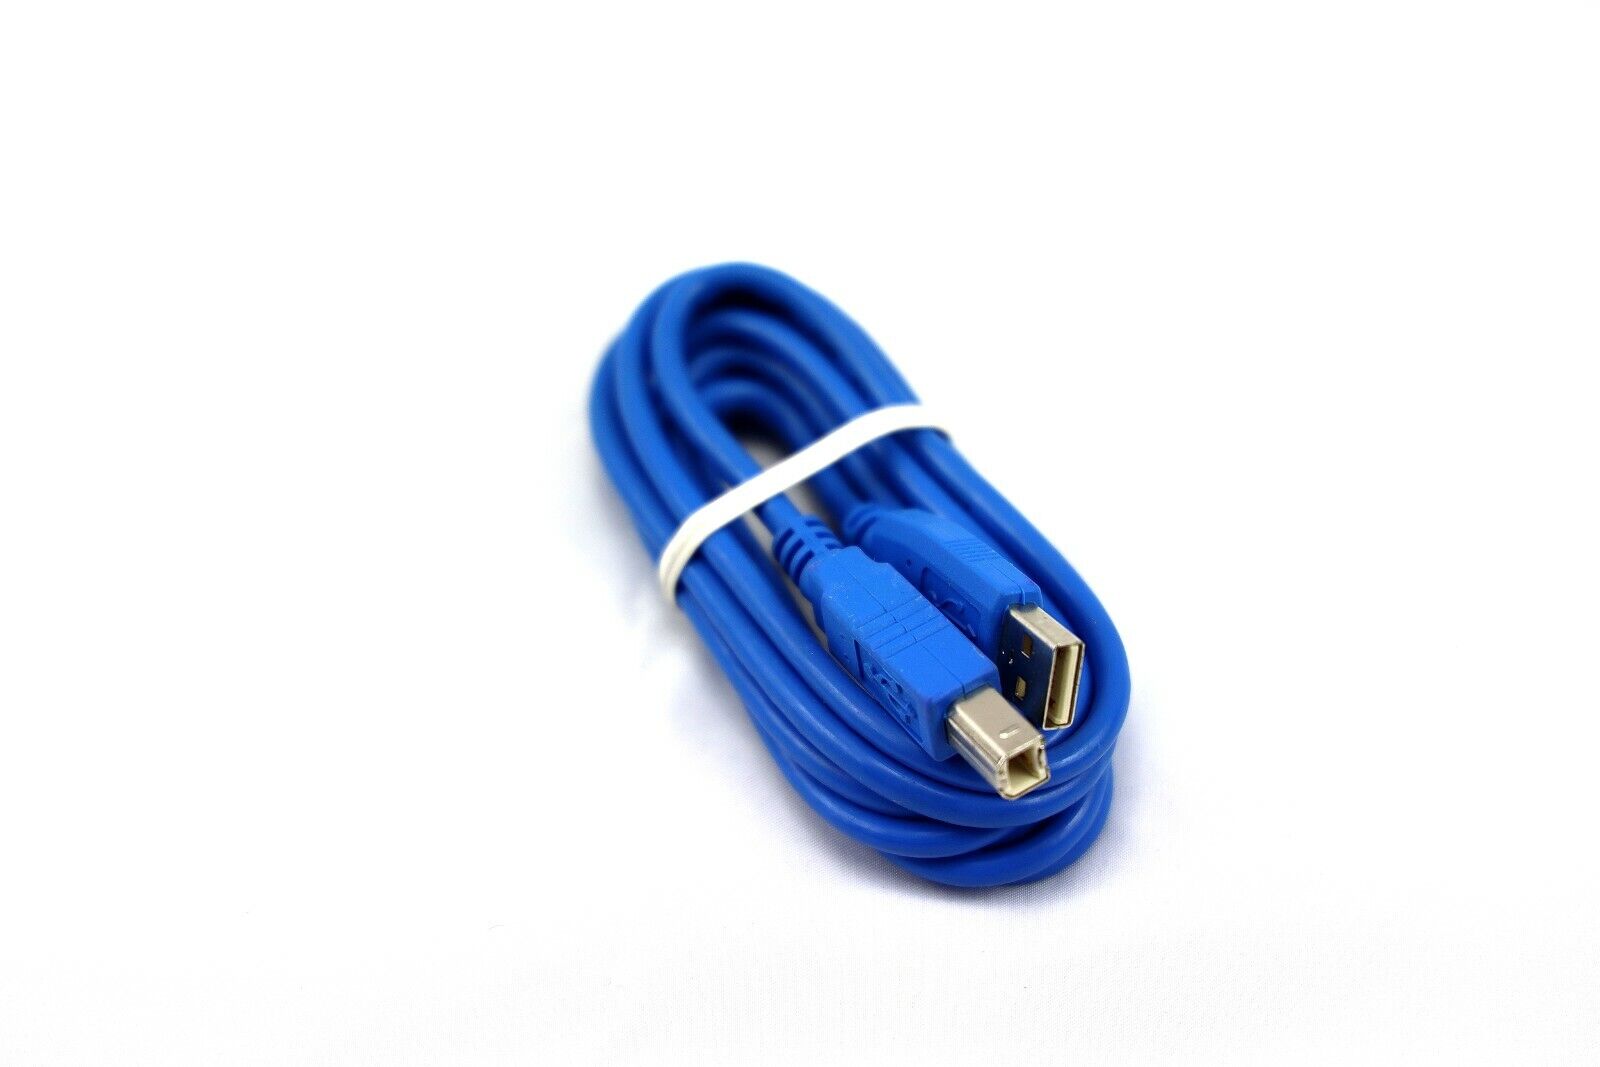 New Heavy Duty High speed USB 3.0 A-B printer cable 2M ment